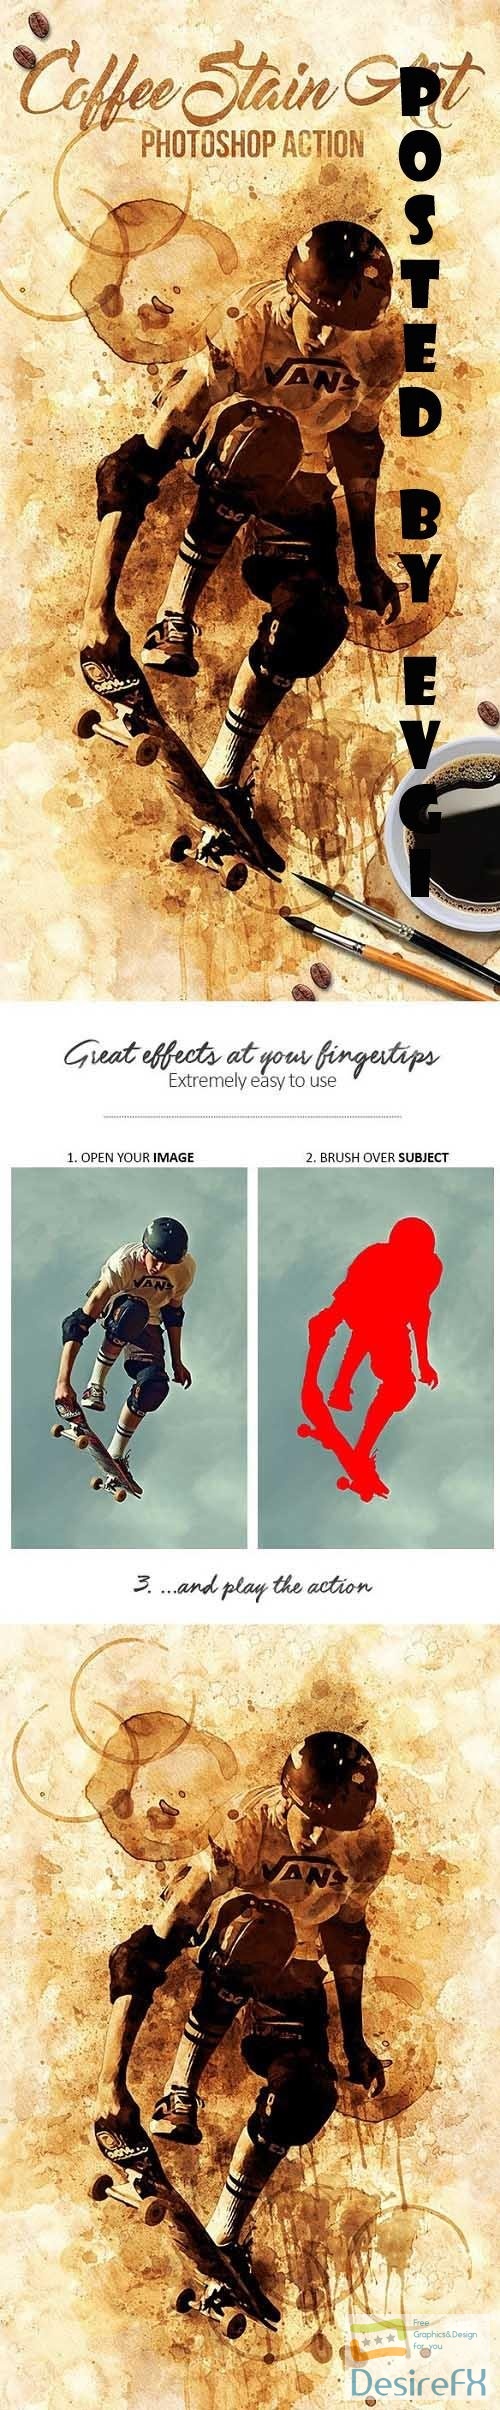 Coffee Stain Art Photoshop Action - 19452915